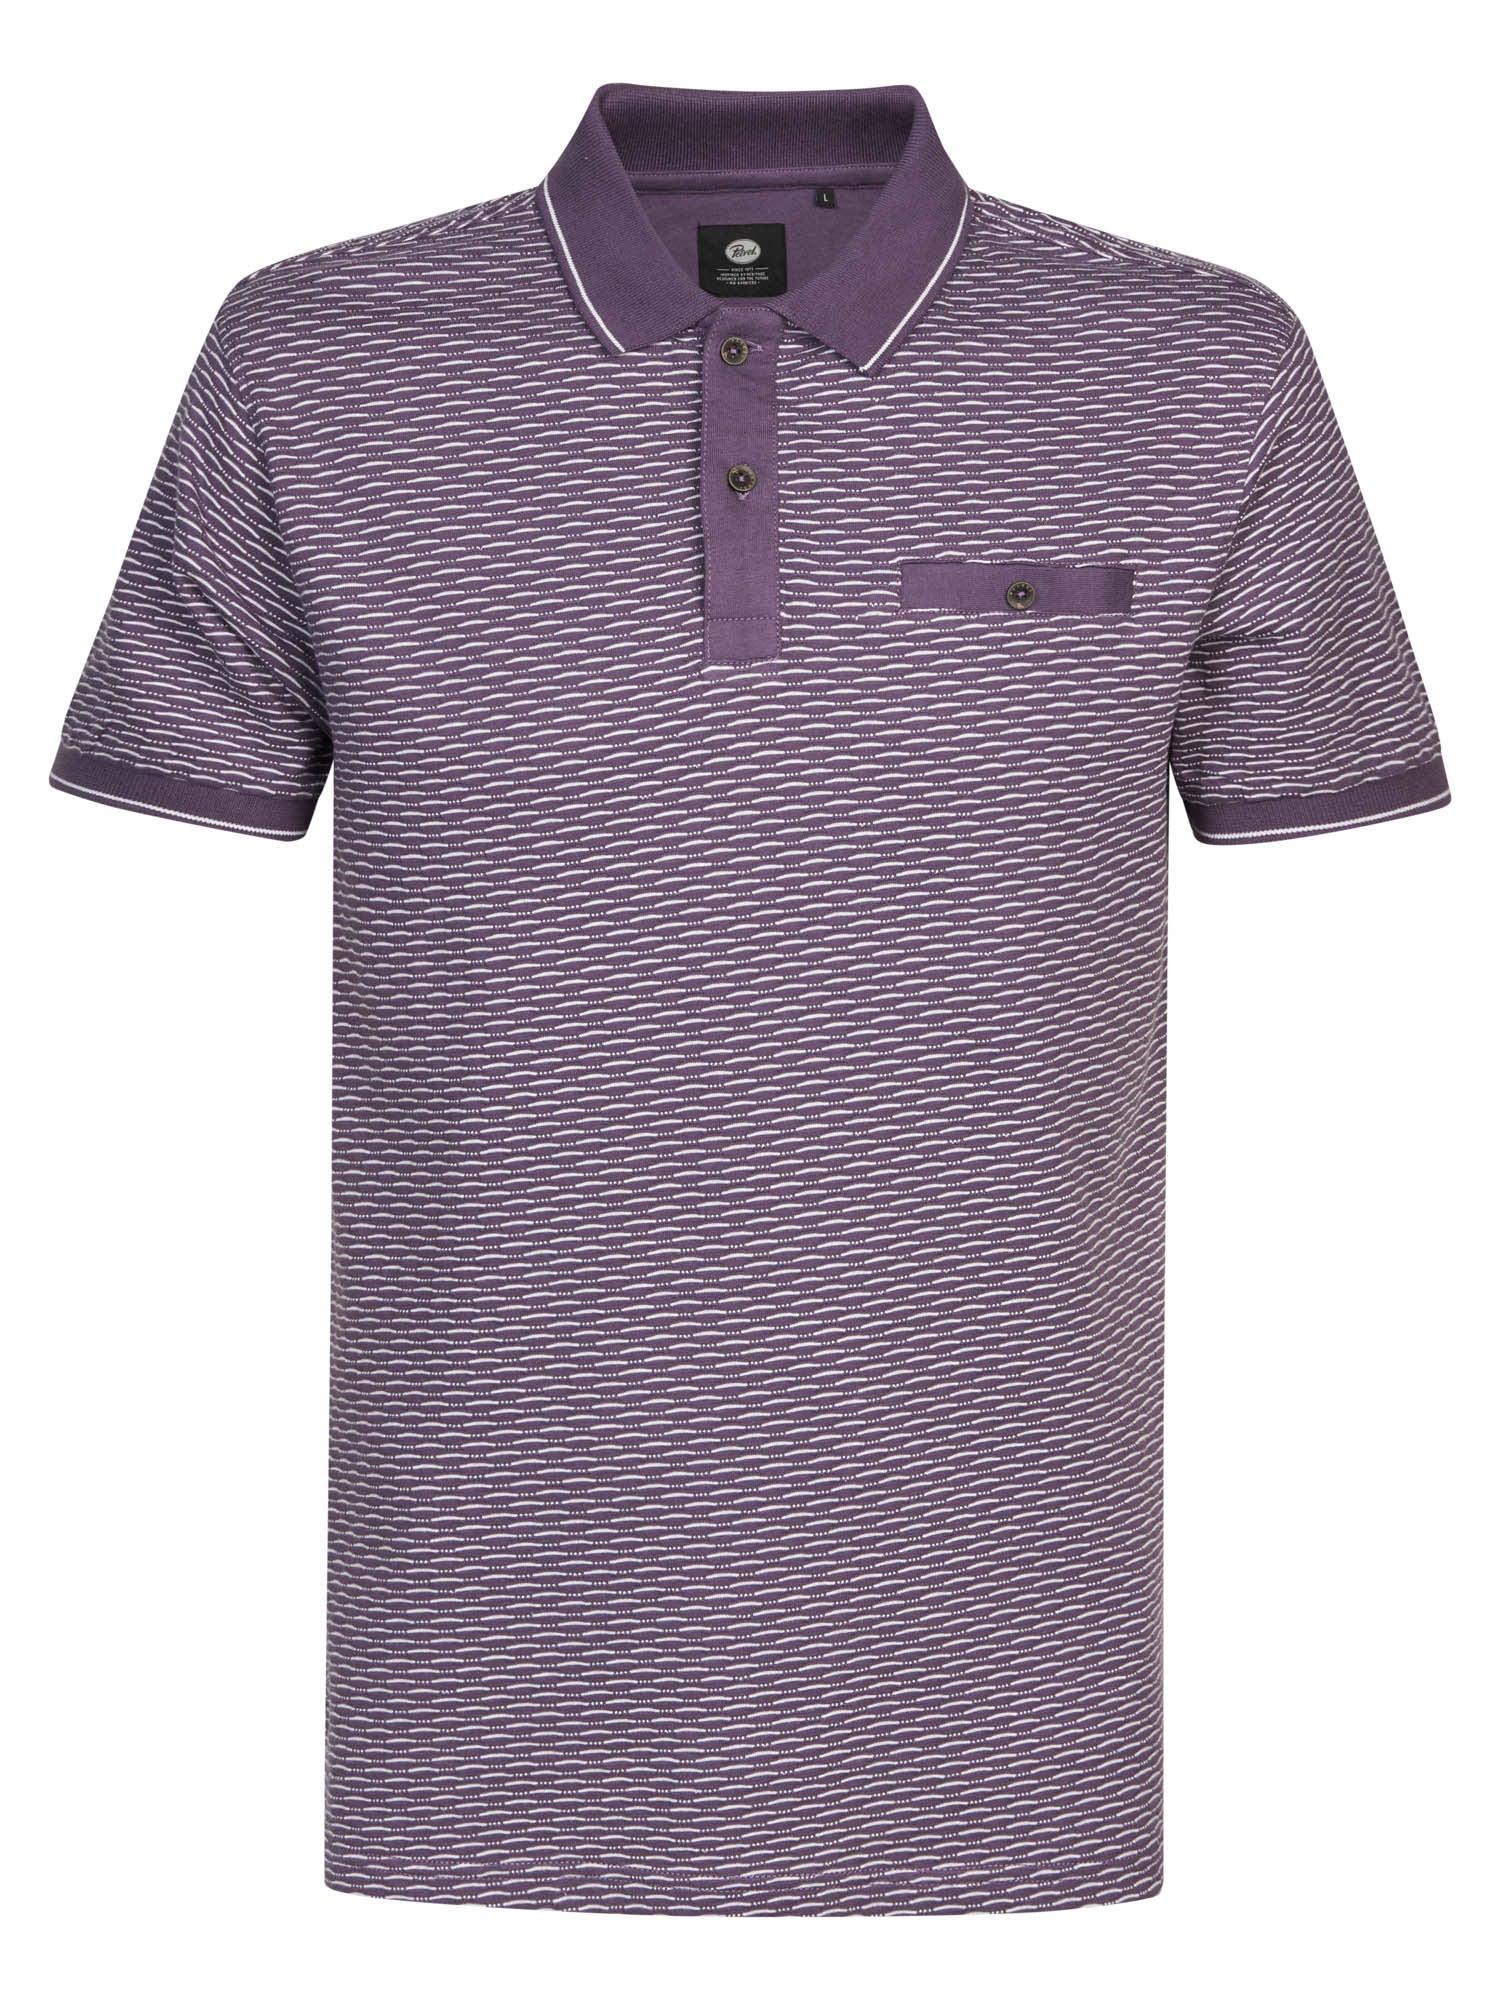 Petrol Industries - Heren All-over print polo - Paars - Maat M